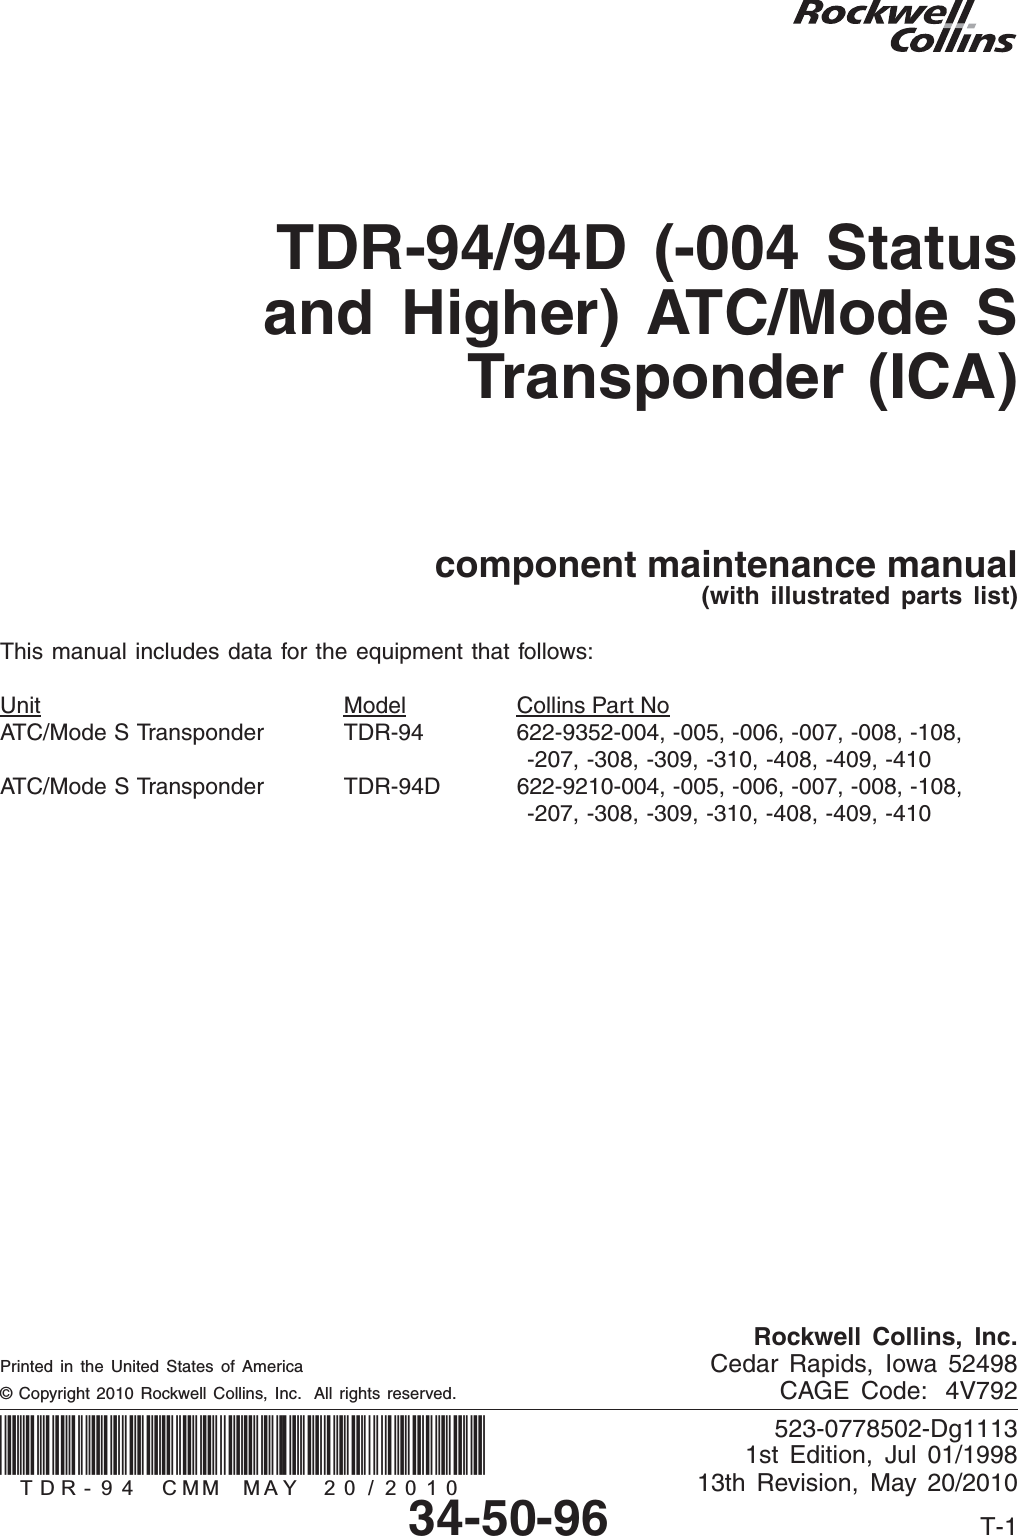 TDR-94/94D (-004 Statusand Higher) ATC/Mode STransponder (ICA)component maintenance manual(with illustrated parts list)This manual includes data for the equipment that follows:Unit Model Collins Part NoATC/Mode S Transponder TDR-94 622-9352-004, -005, -006, -007, -008, -108,-207, -308, -309, -310, -408, -409, -410ATC/Mode S Transponder TDR-94D 622-9210-004, -005, -006, -007, -008, -108,-207, -308, -309, -310, -408, -409, -410Rockwell Collins, Inc.Printed in the United States of America Cedar Rapids, Iowa 52498© Copyright 2010 Rockwell Collins, Inc. All rights reserved. CAGE Code: 4V792523-0778502-Dg11131st Edition, Jul 01/199813th Revision, May 20/20107&apos;5B&amp;00B0$&lt;B34-50-96 T-1